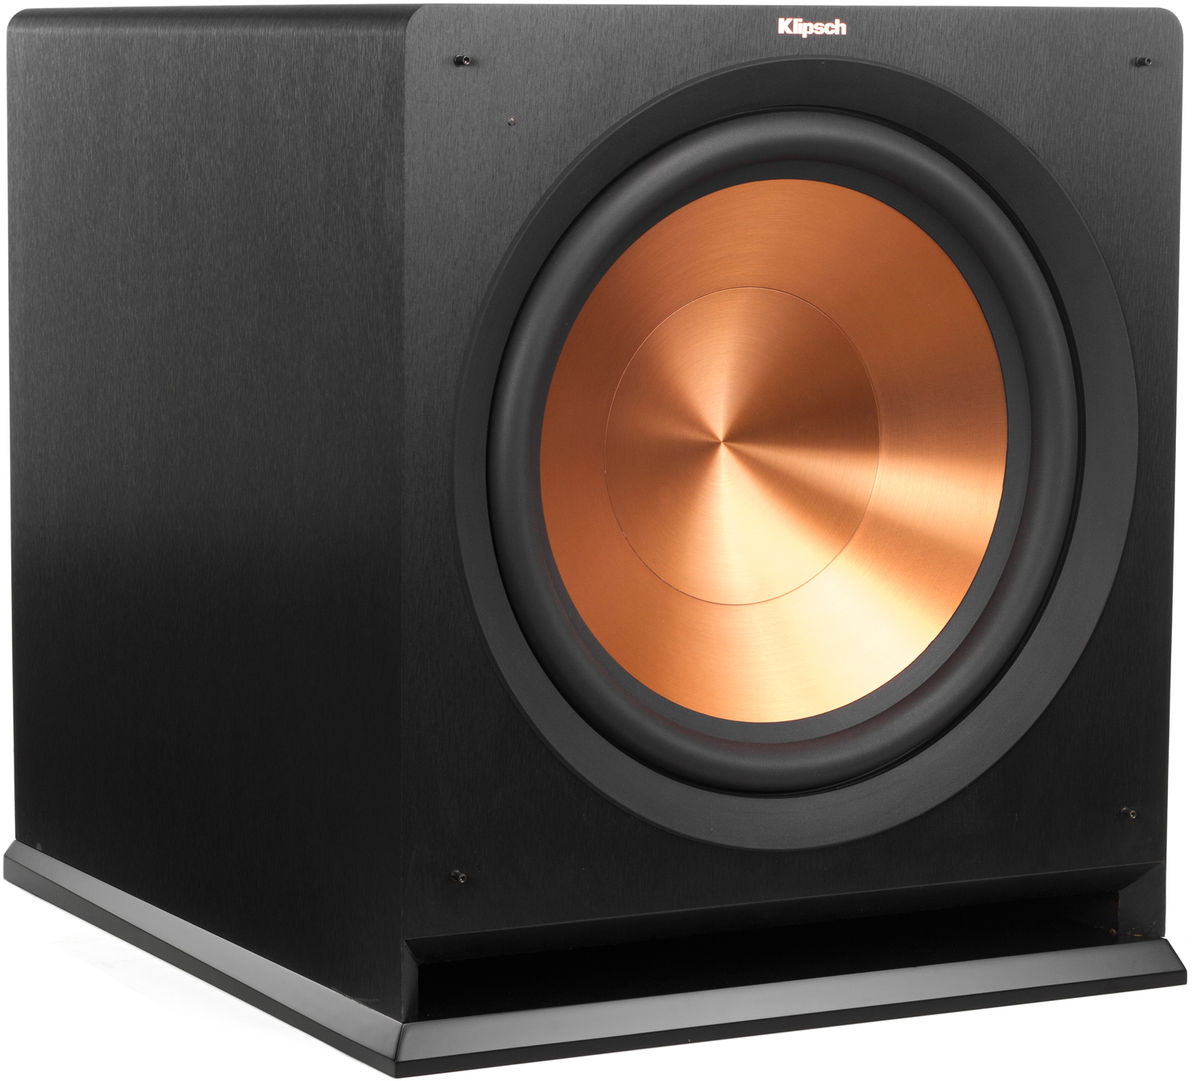 Flagship of the Klipsch Reference Series of active subwoofers, the R-115 SW goes deeper, louder and clearer than most competing subs at its class